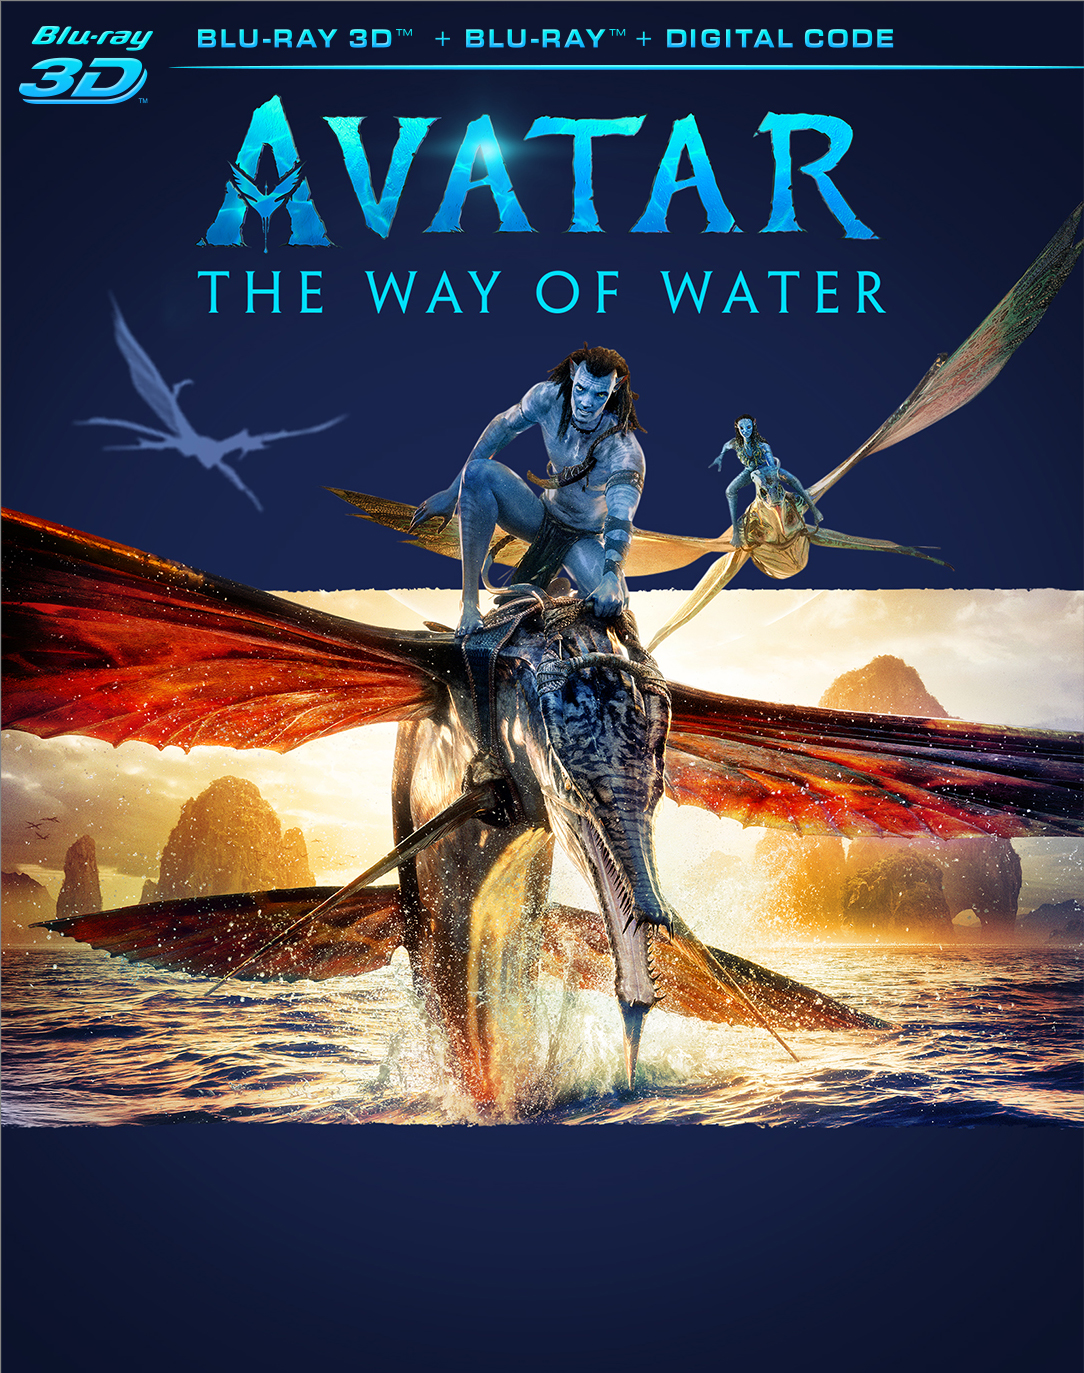 Avatar: The Way of Water [Includes Digital Copy] [Blu-ray] [2022] - Best Buy